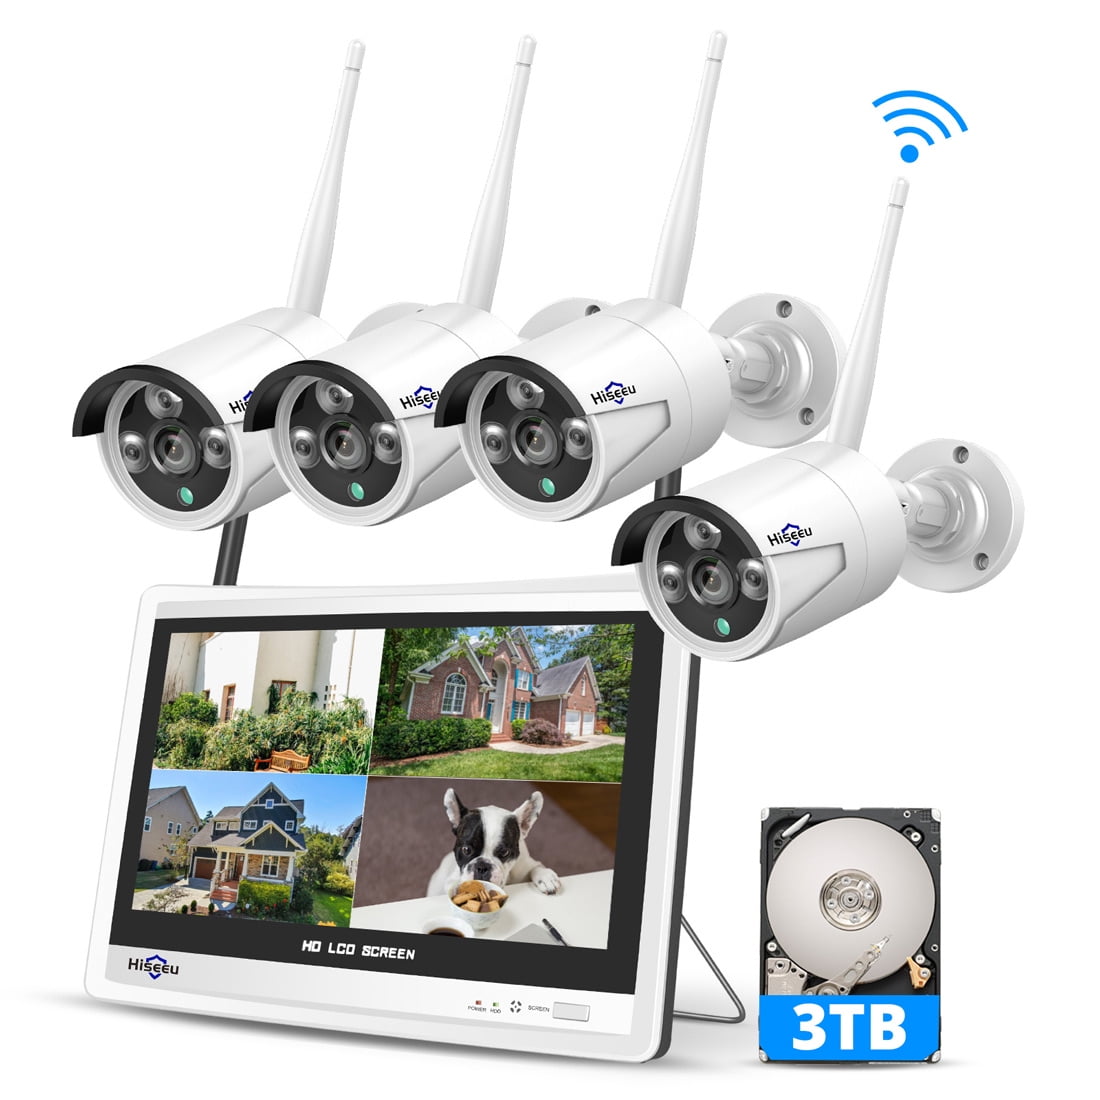 Aanleg beklimmen Afleiden Hiseeu 3MP Security Camera System with 12.1" Monitor, 3TB Hard Drive, 4Pcs  Security Cameras Wireless Wifi for Recording and Remote View, Home Security  Camera System - Walmart.com